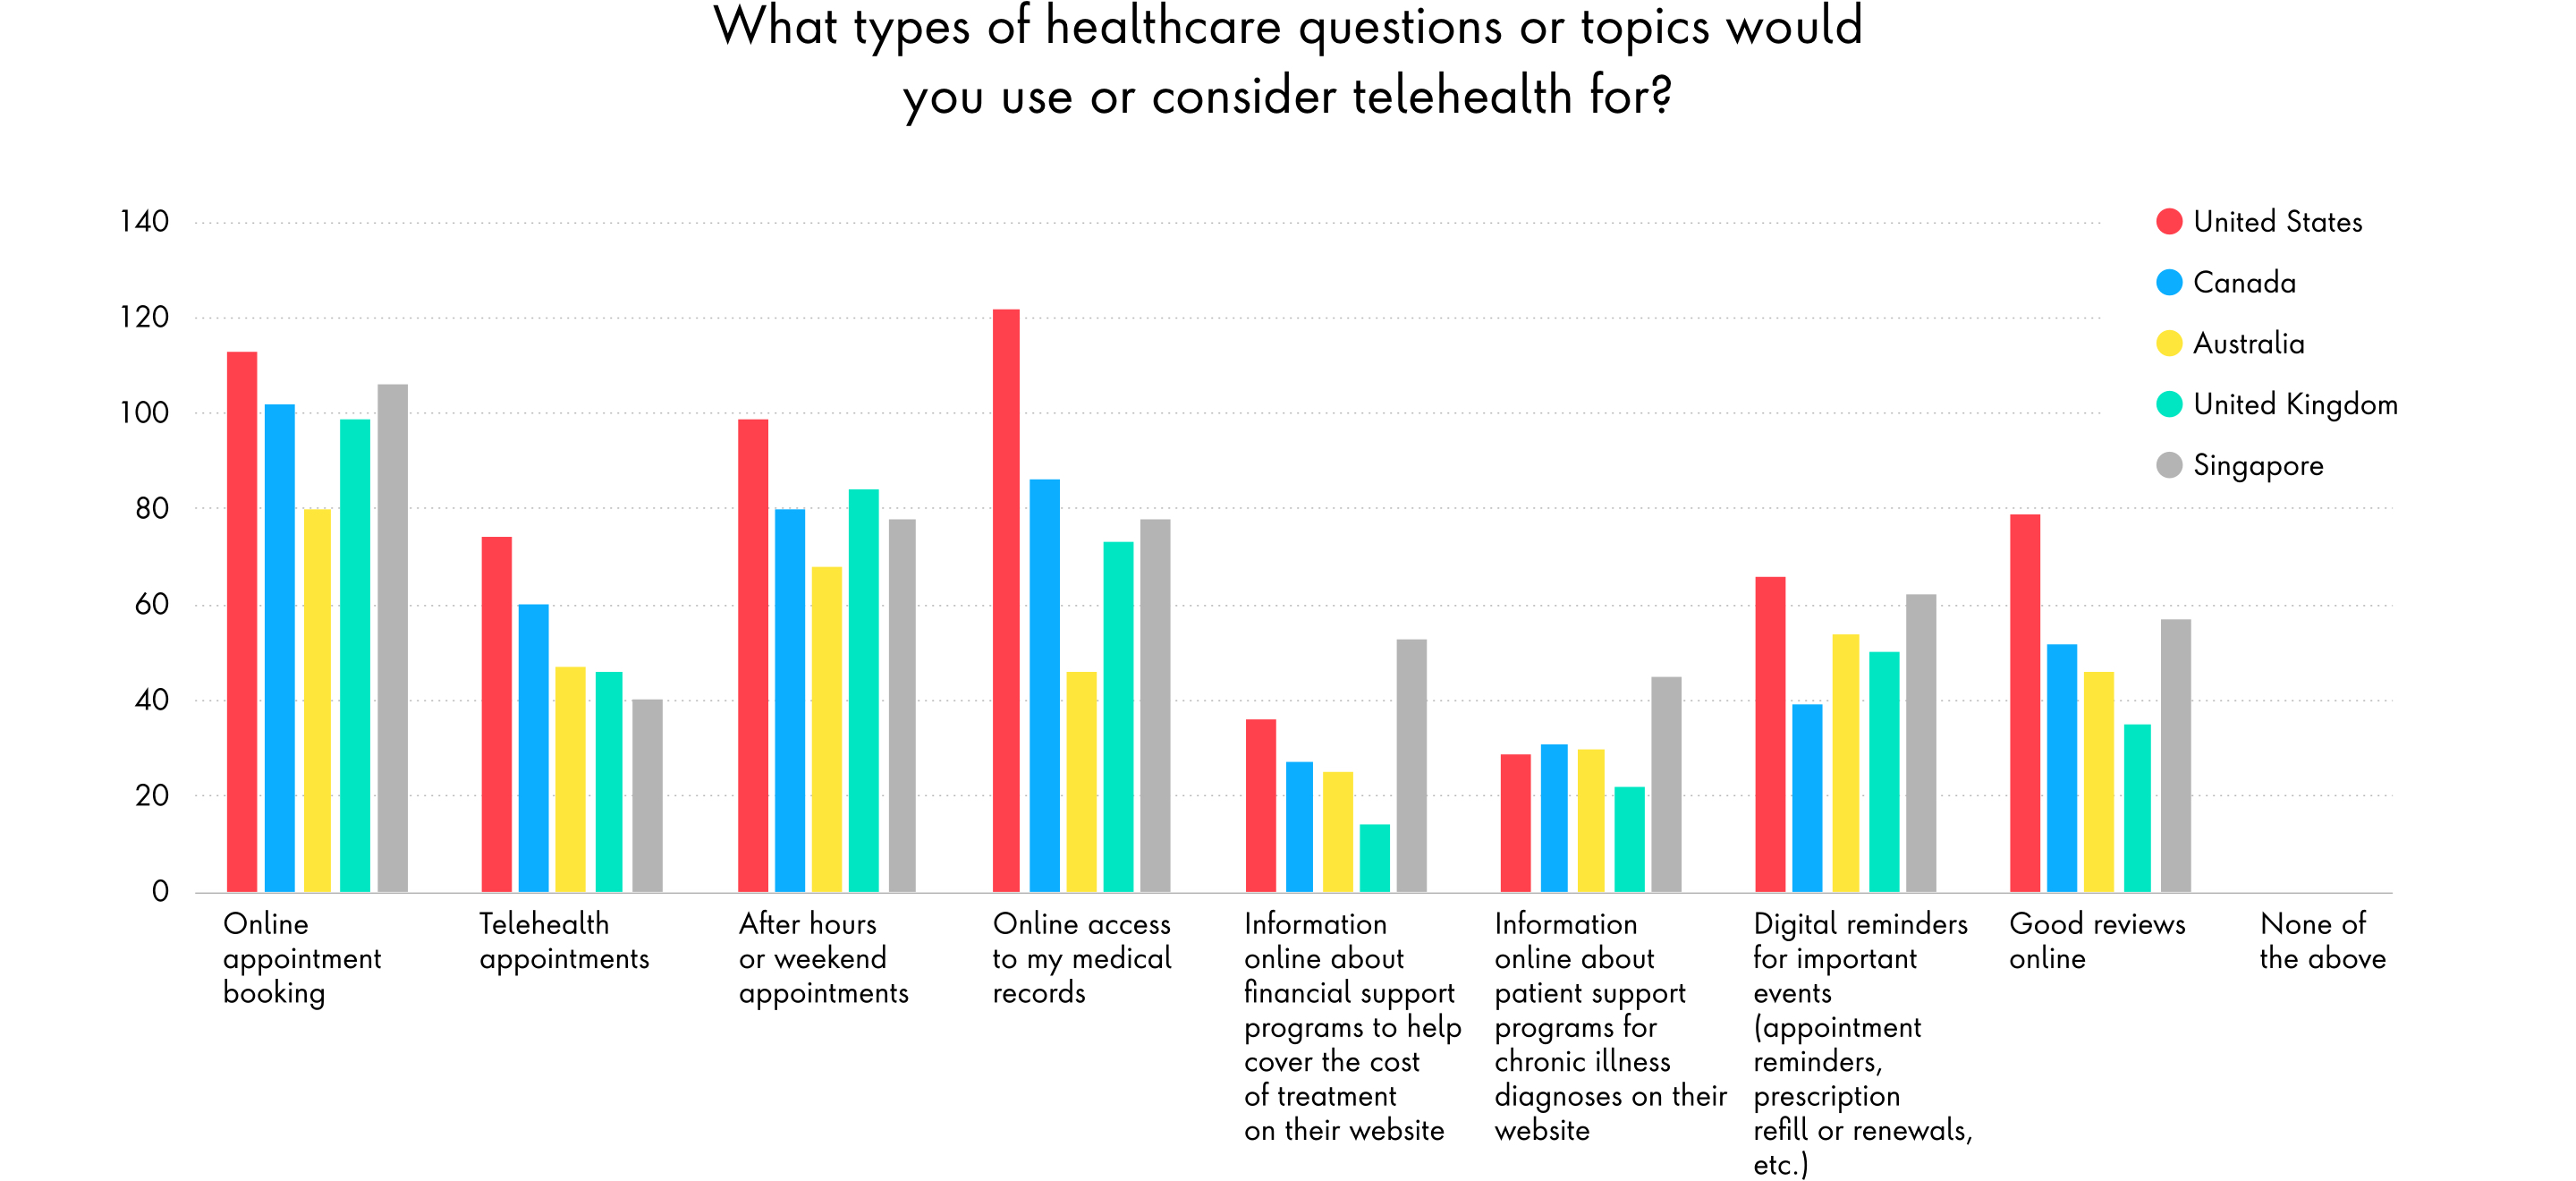 Chart shows types of healthcare topics that would make patients consider using telemedicine.